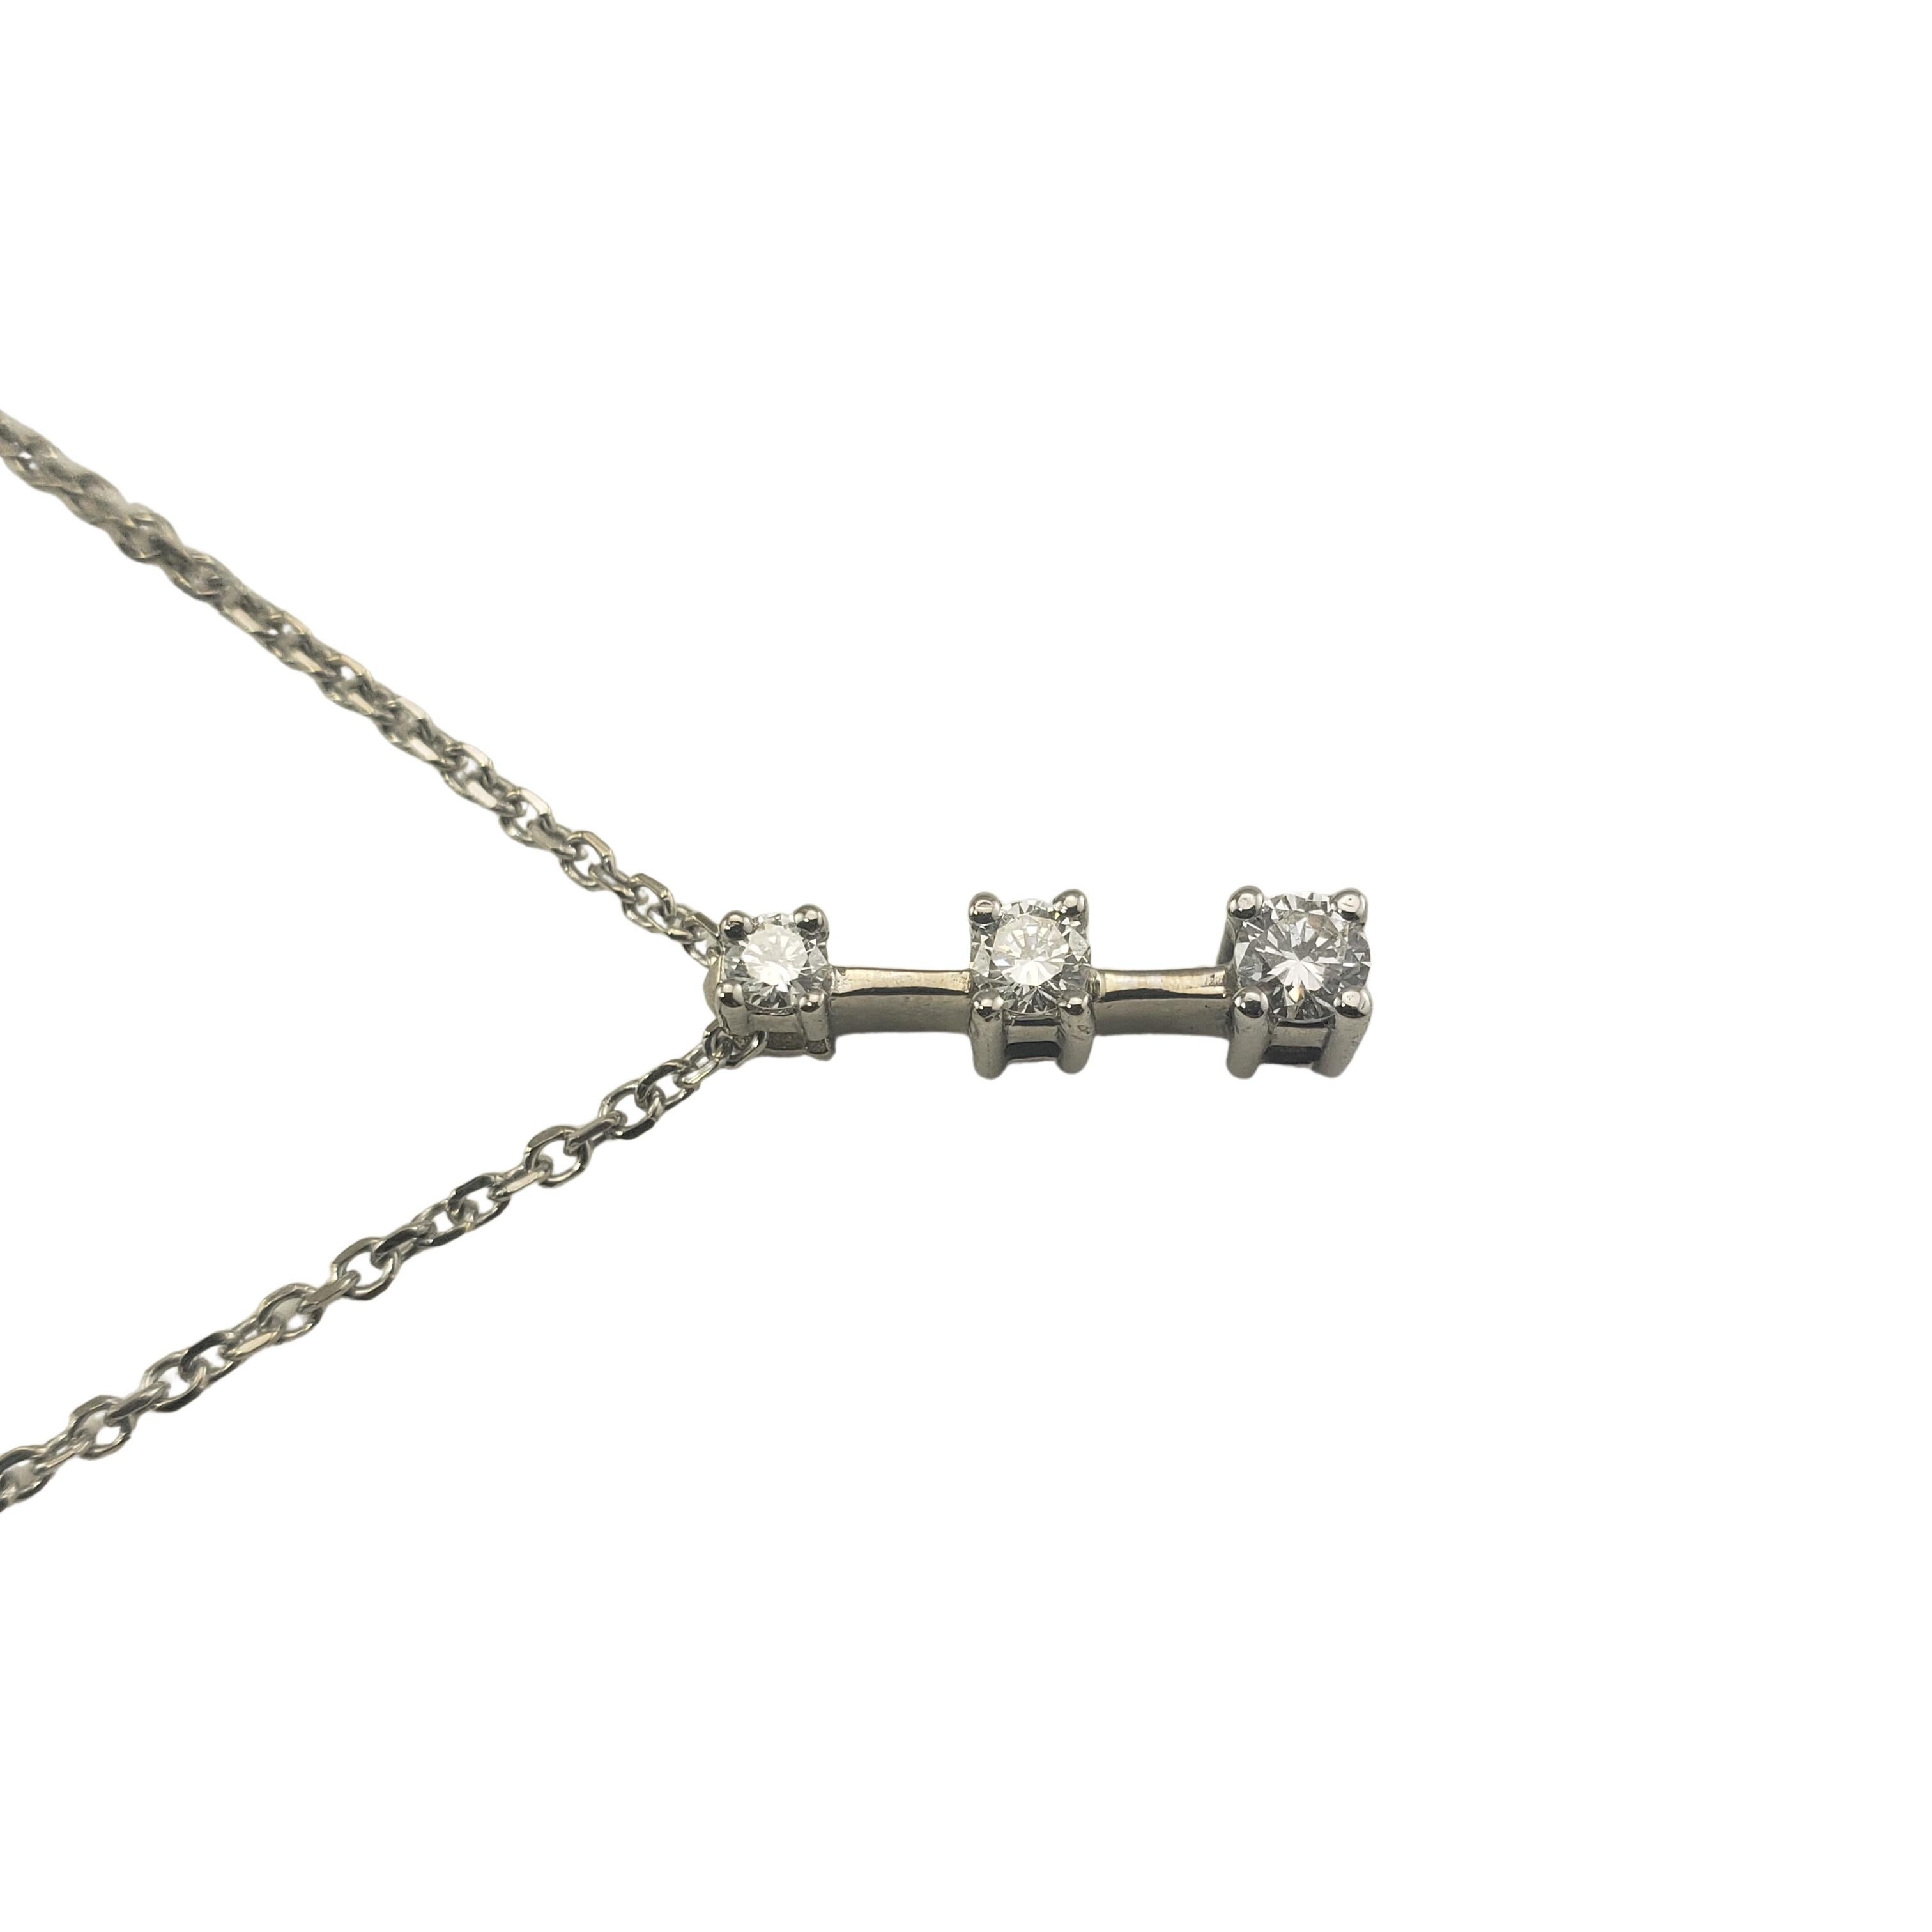 Vintage 14 Karat White Gold Diamond Pendant Necklace-

This sparkling pendant features thee round brilliant cut diamonds set in classic 14K white gold.  Suspends from a classic cable necklace.

Approximate total diamond weight:  .30 ct.

Diamond